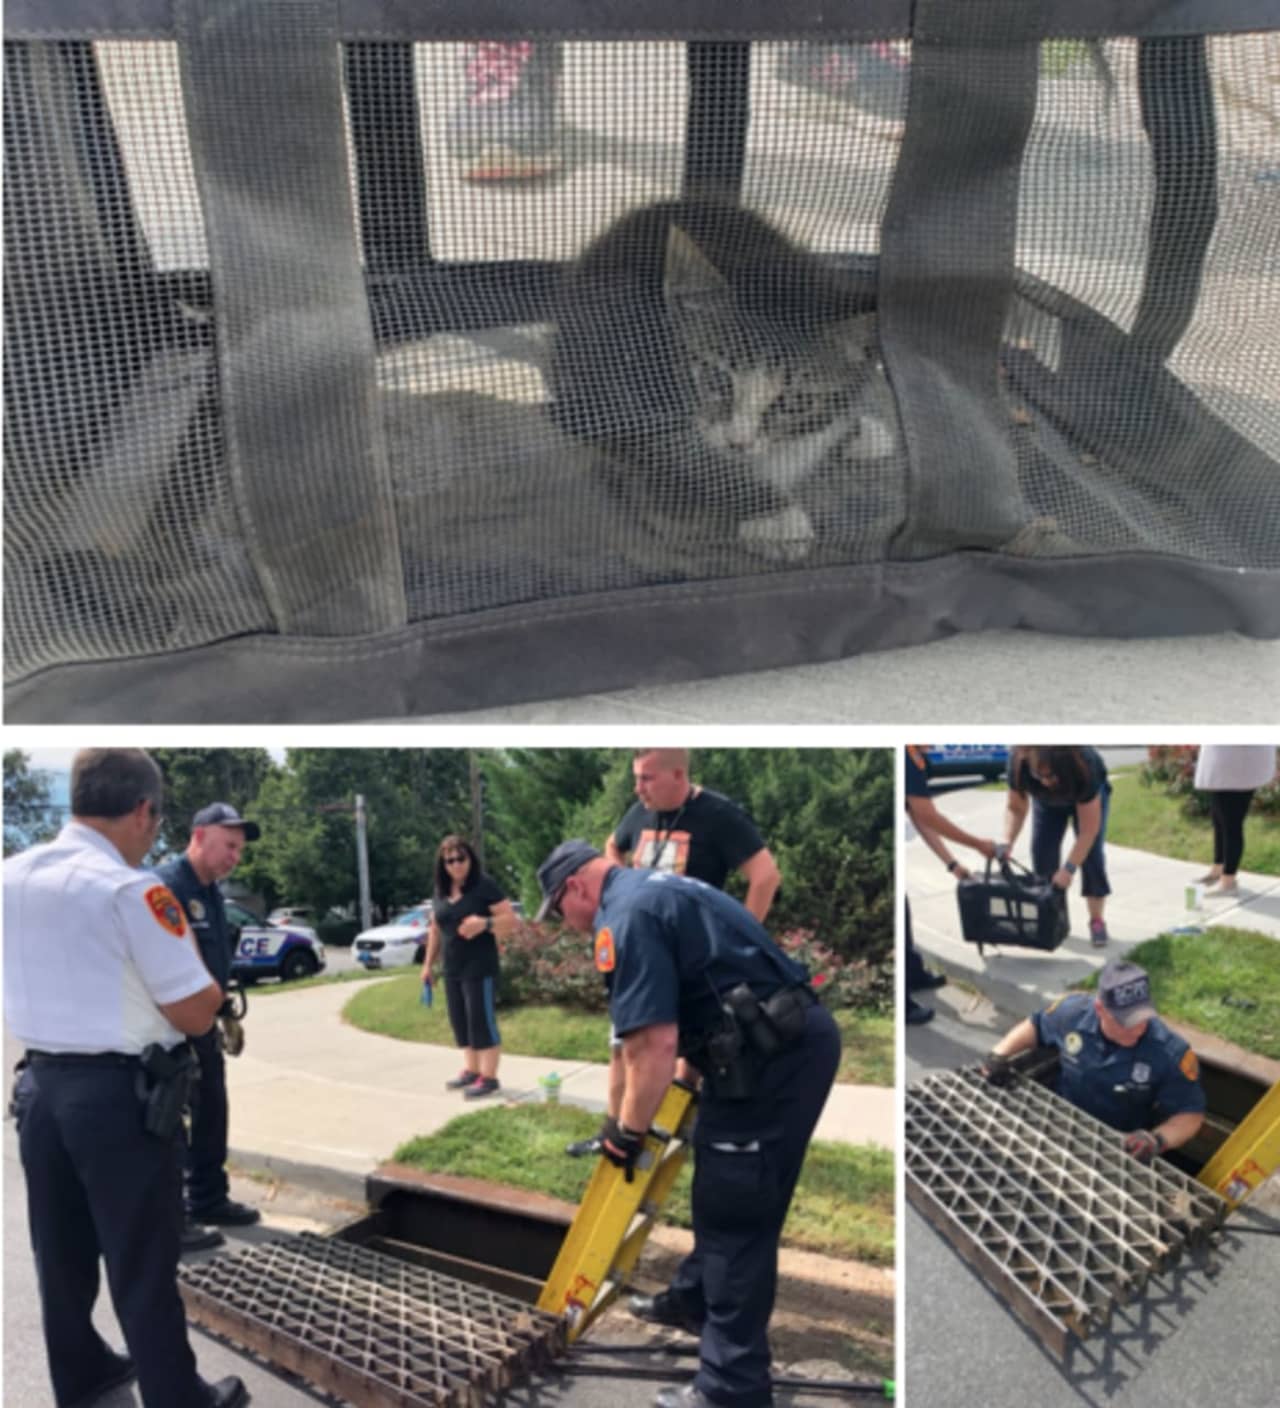 Officers with the Suffolk County Police Department rescued a kitten from a storm drain in Lindenhurst on Sunday, Sept. 8.